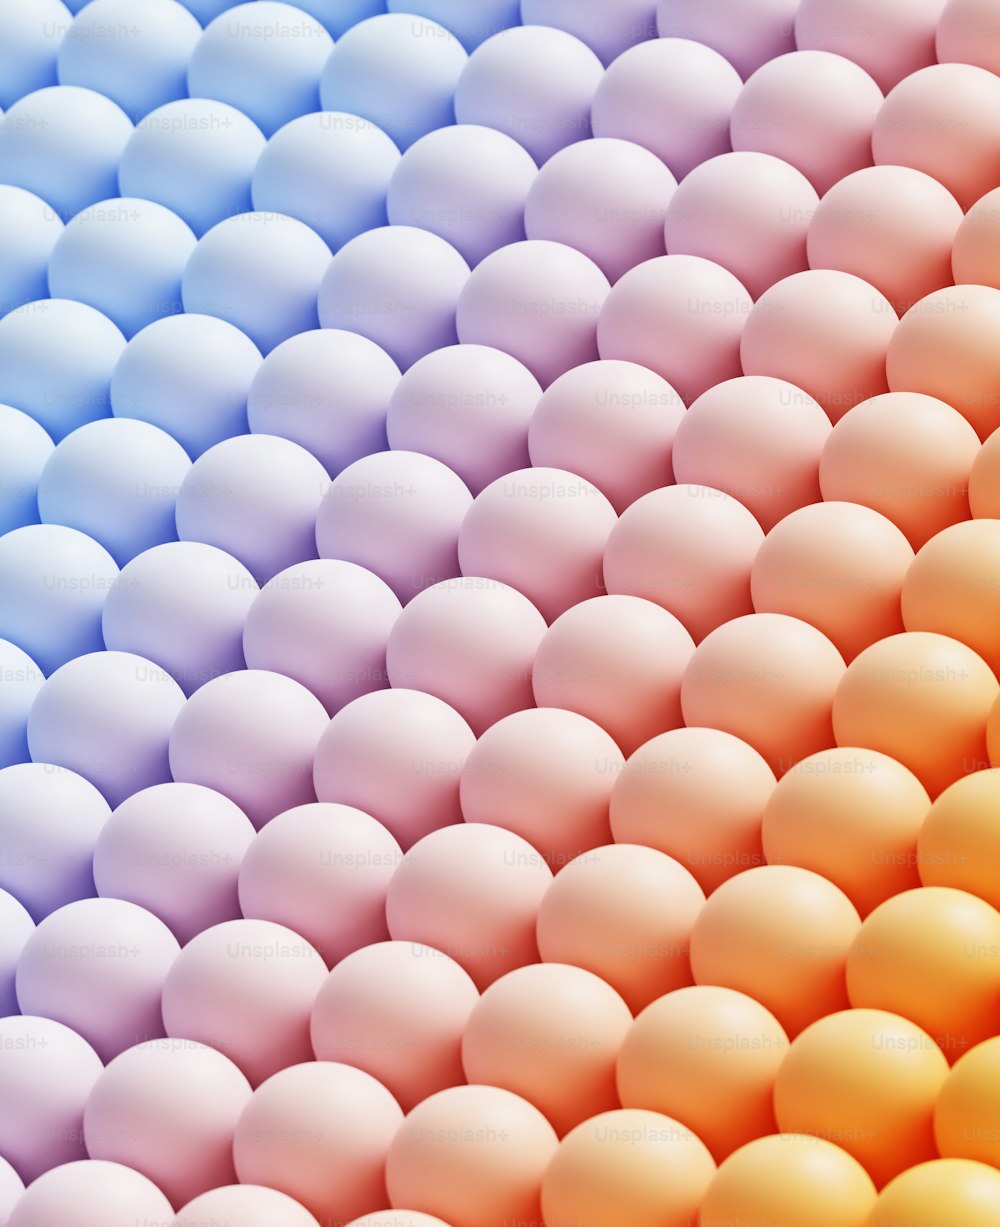 a large pile of pink and white eggs